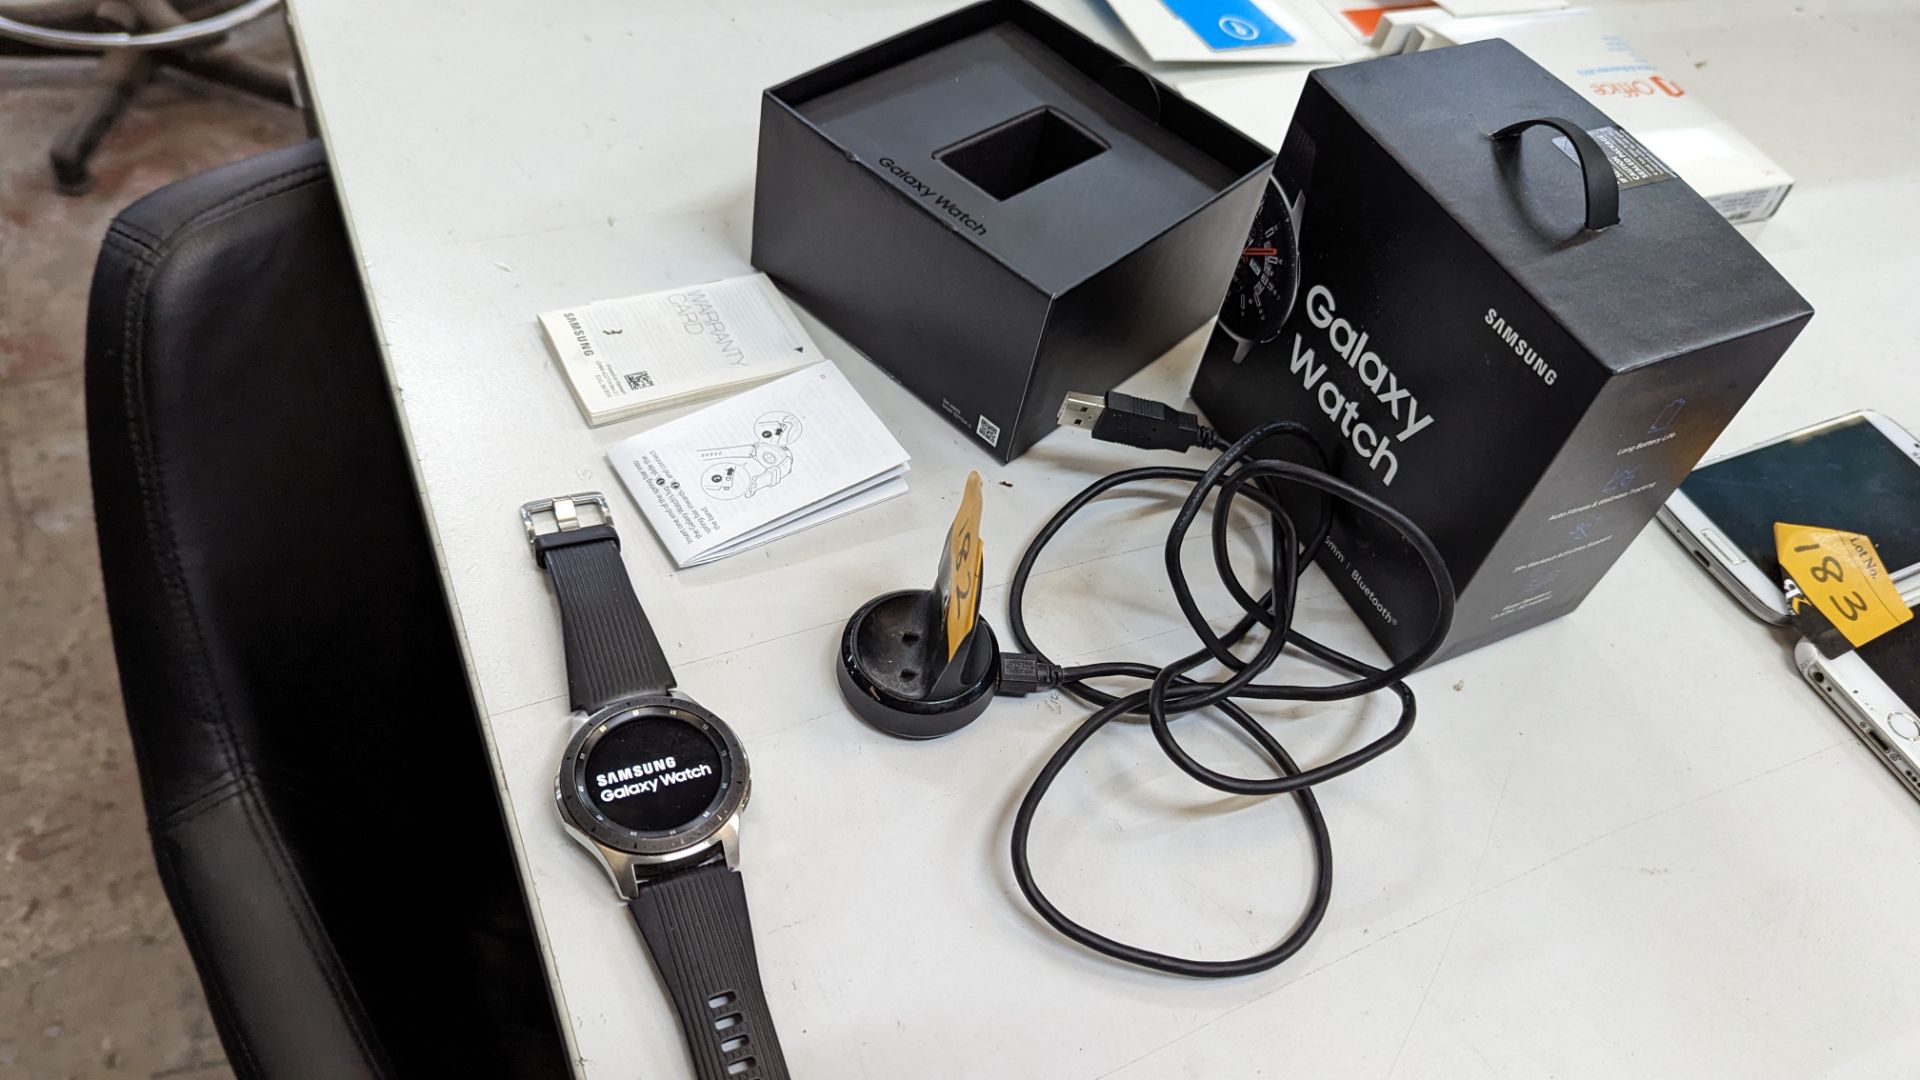 Samsung Galaxy 46mm smartwatch including charging base with USB cable - Image 9 of 16